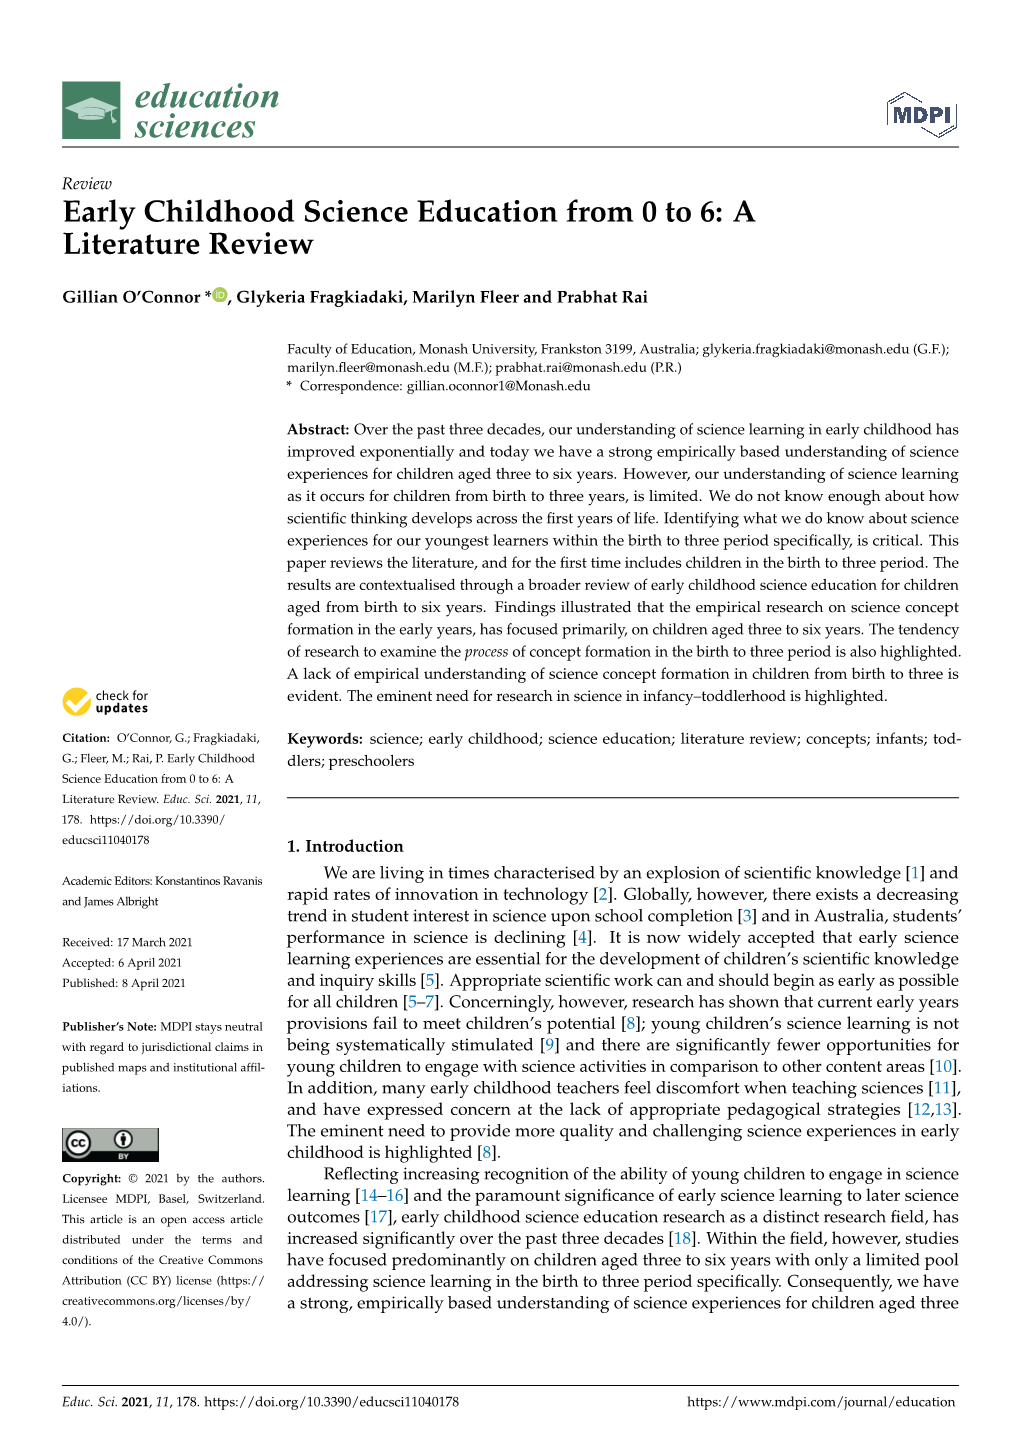 Early Childhood Science Education from 0 to 6: a Literature Review